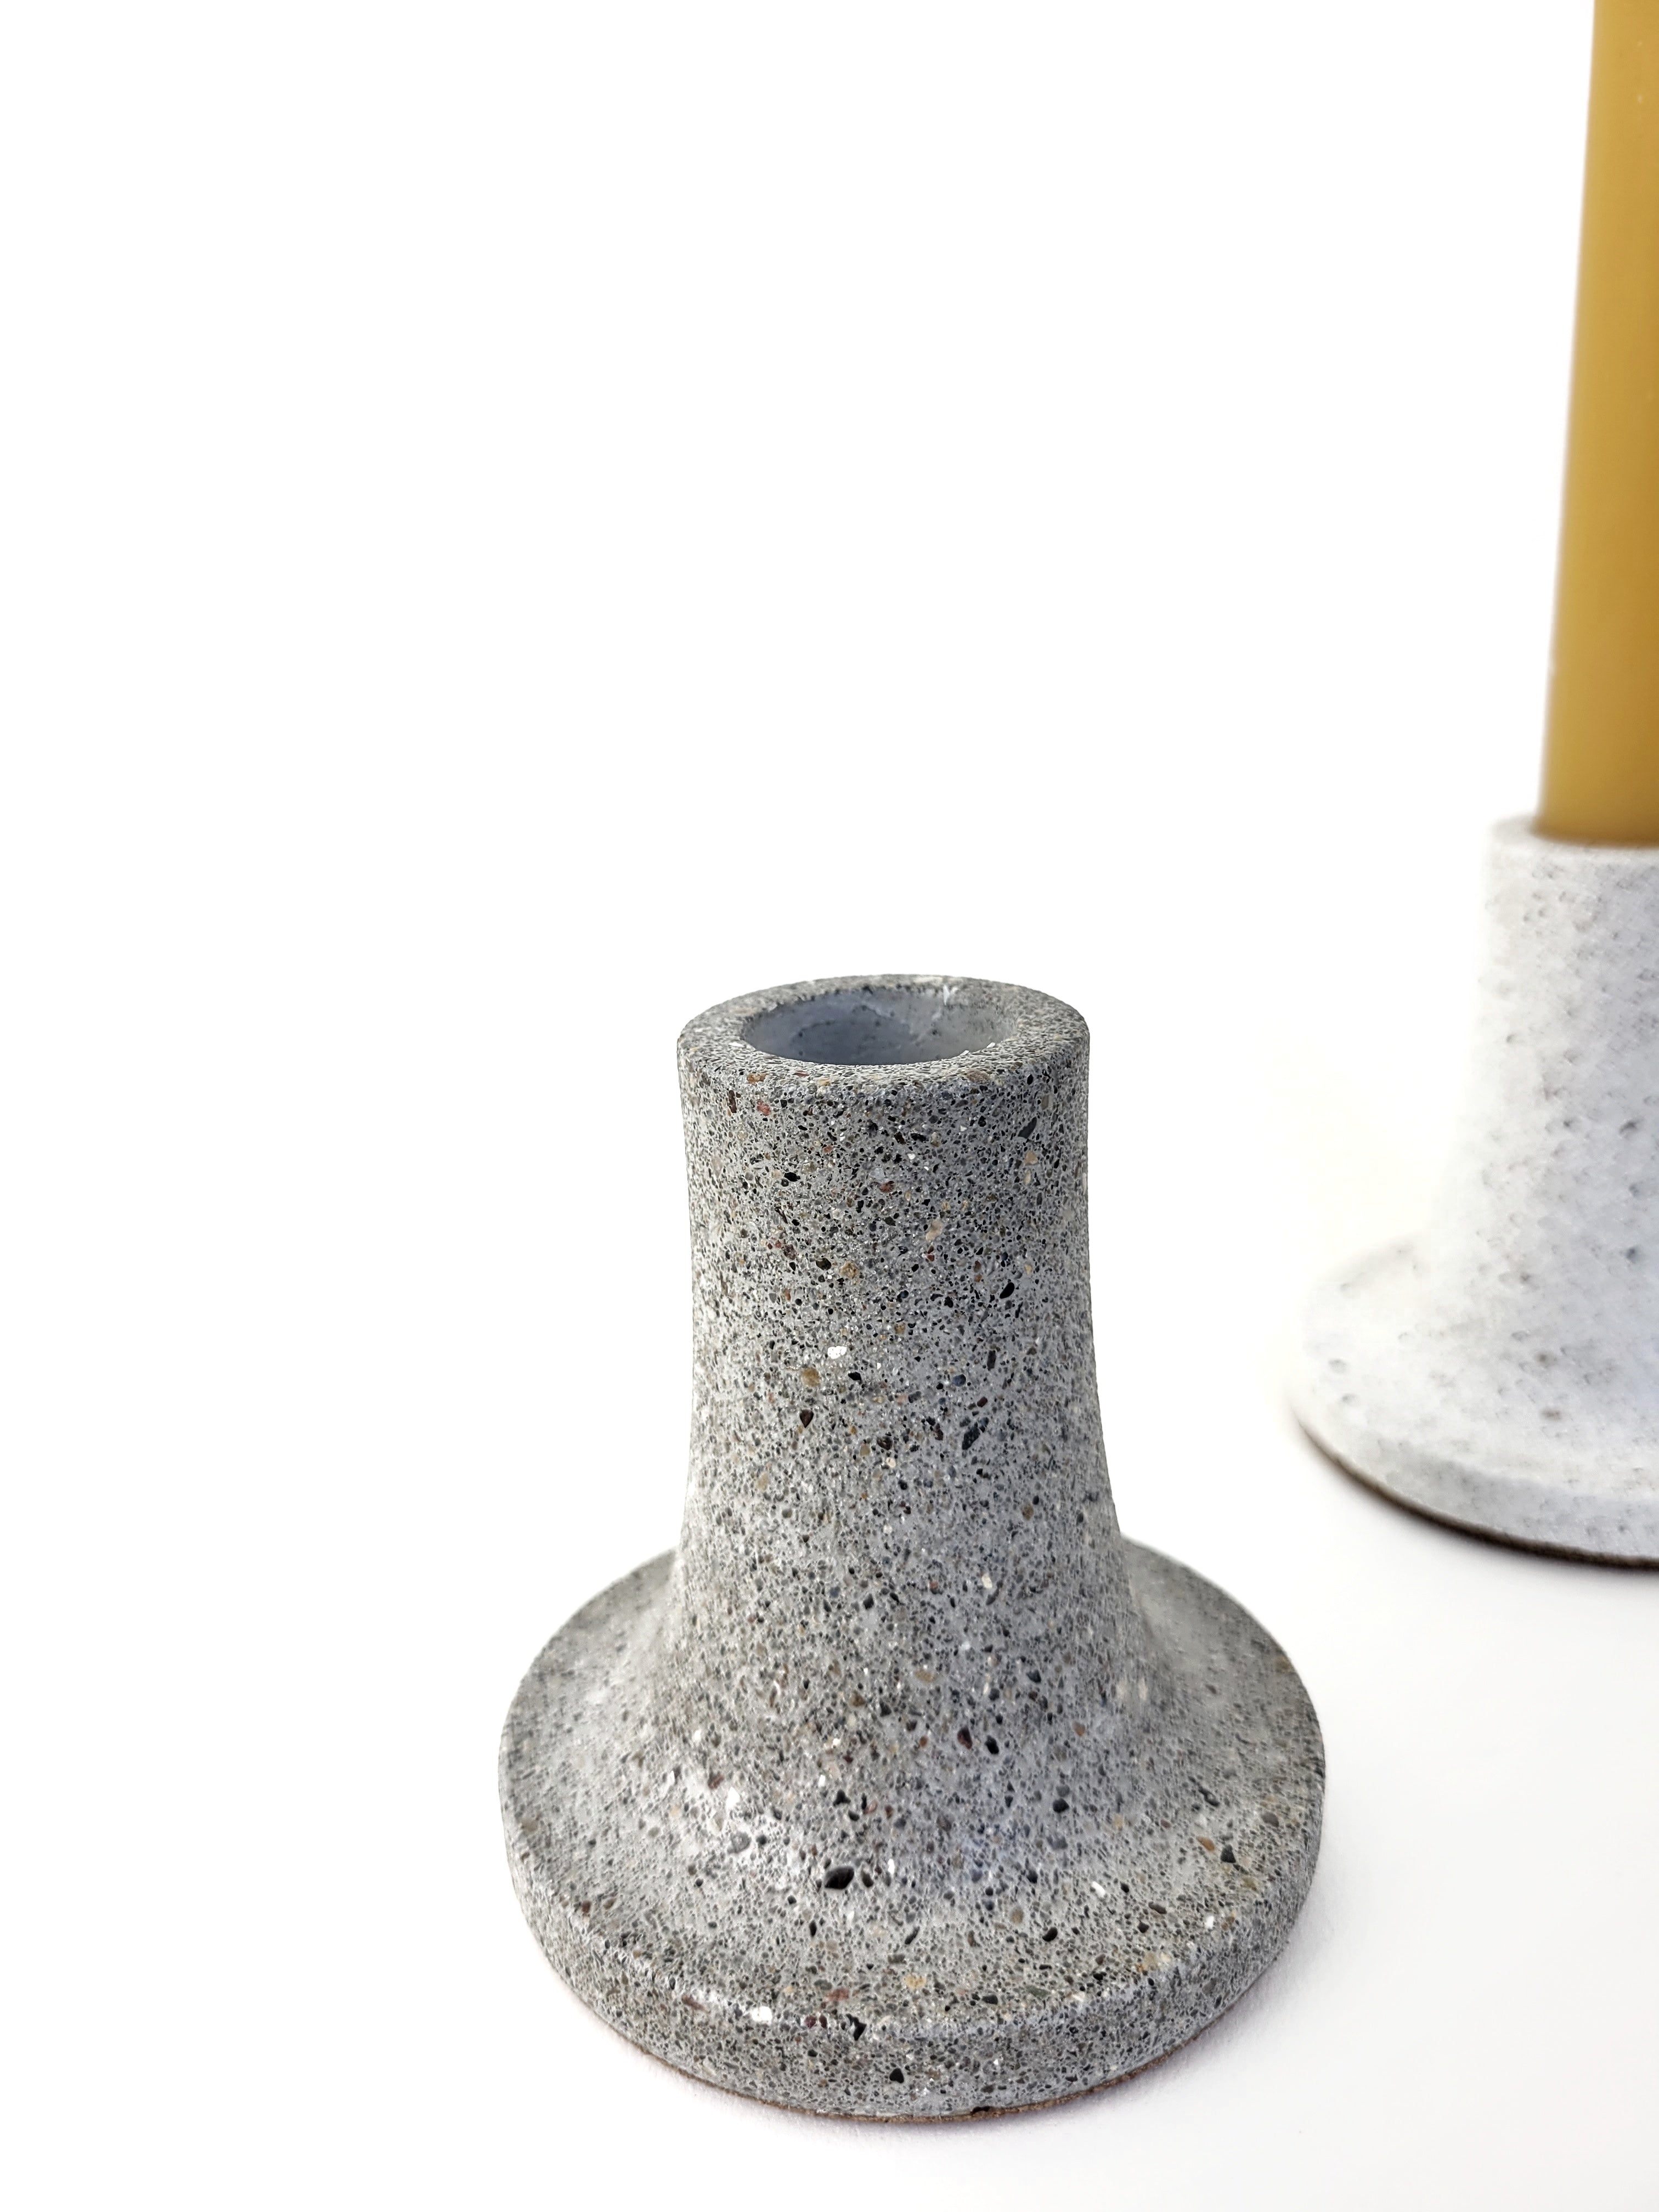 Tall Taper Candle Holder in Stone Grey and White - Elegant Home Decor Accessory against a White Background